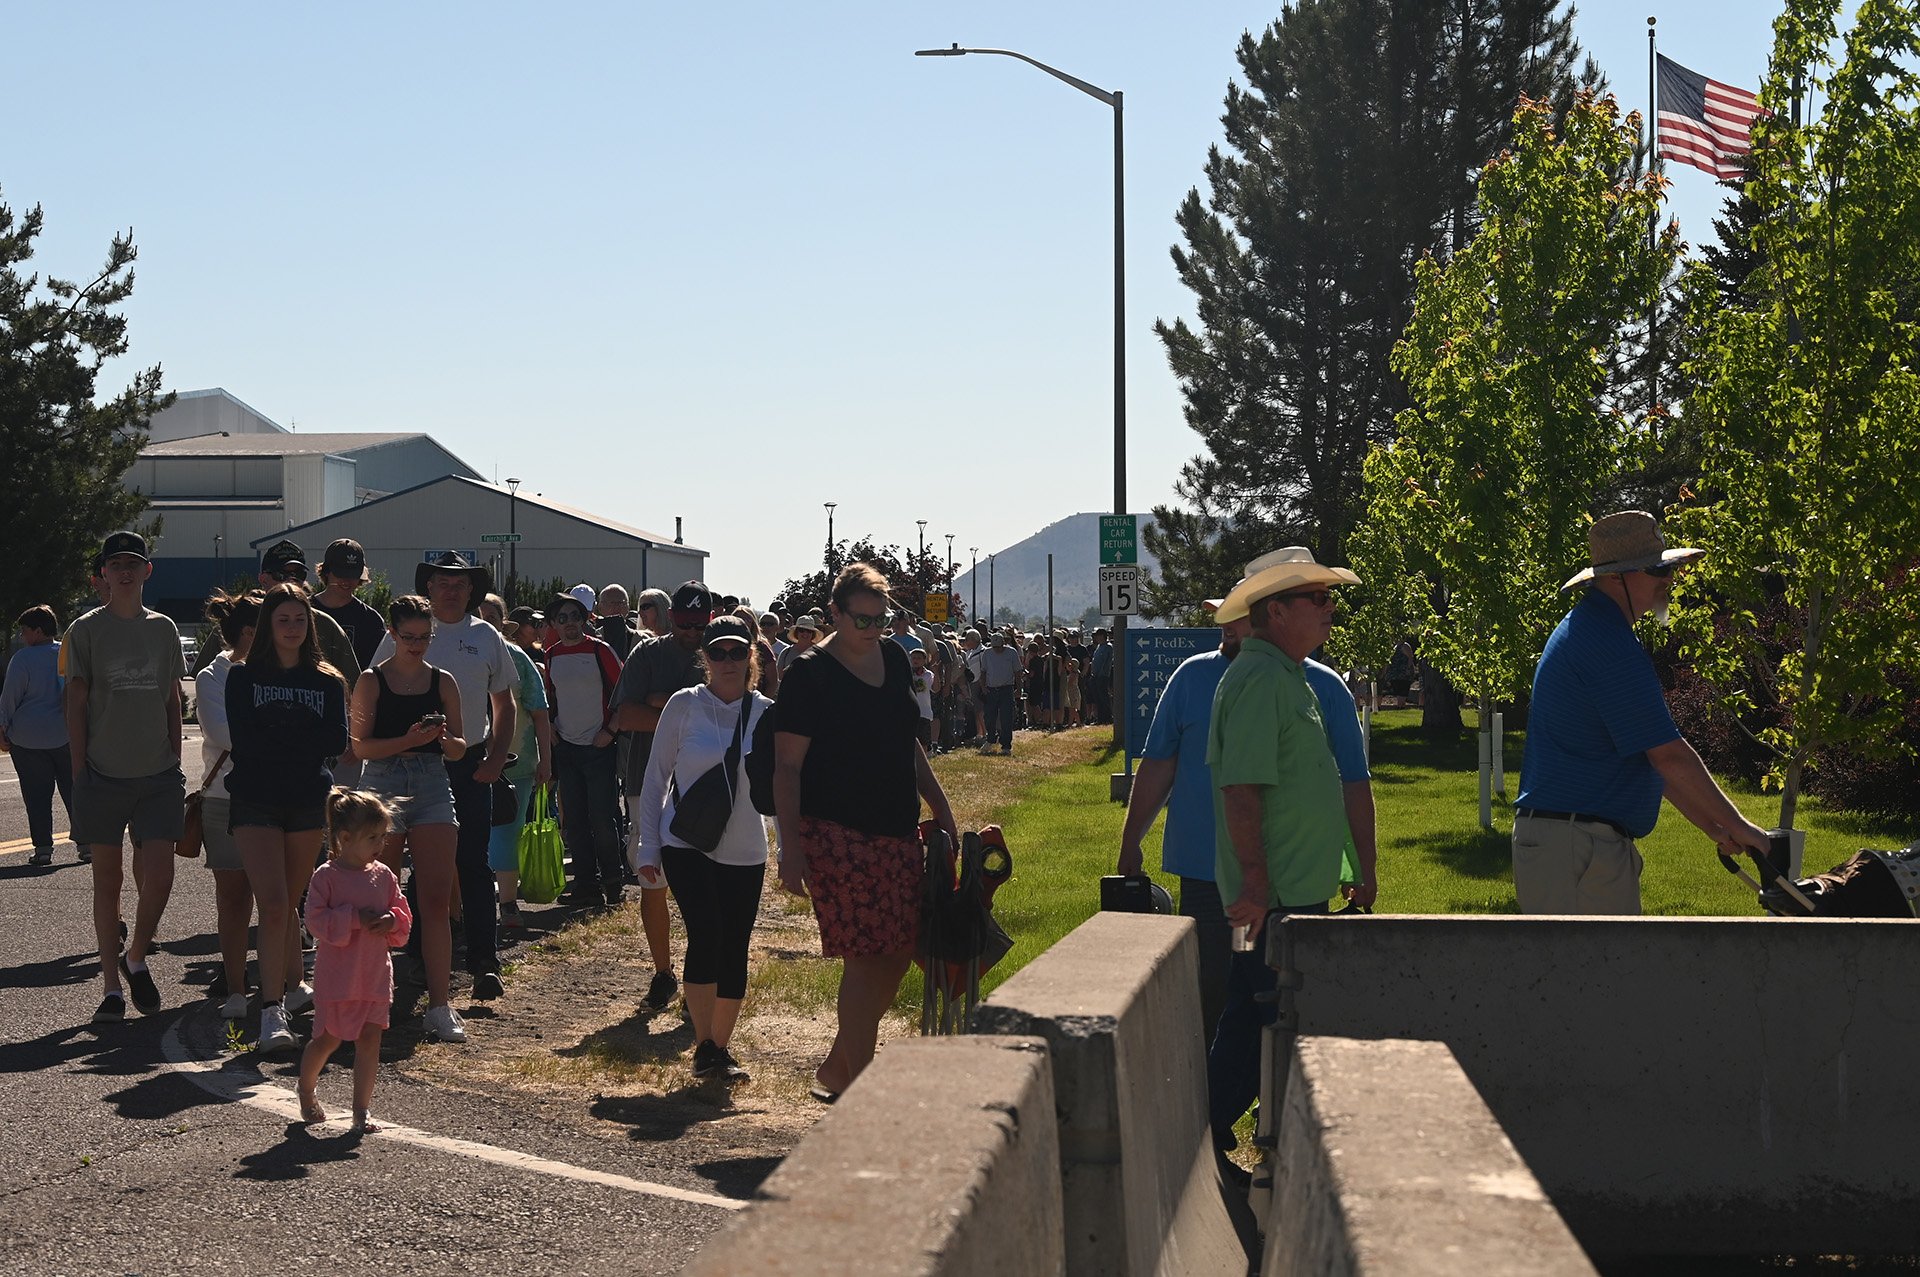  Members of community enter the base at Kingsley Field in Klamath Falls, Ore., for the Sentry Eagle 2022 Open House, a day of aerial demonstrations, static displays and a first-hand look at the mission of the 173rd Fighter Wing, June 25. Several peop